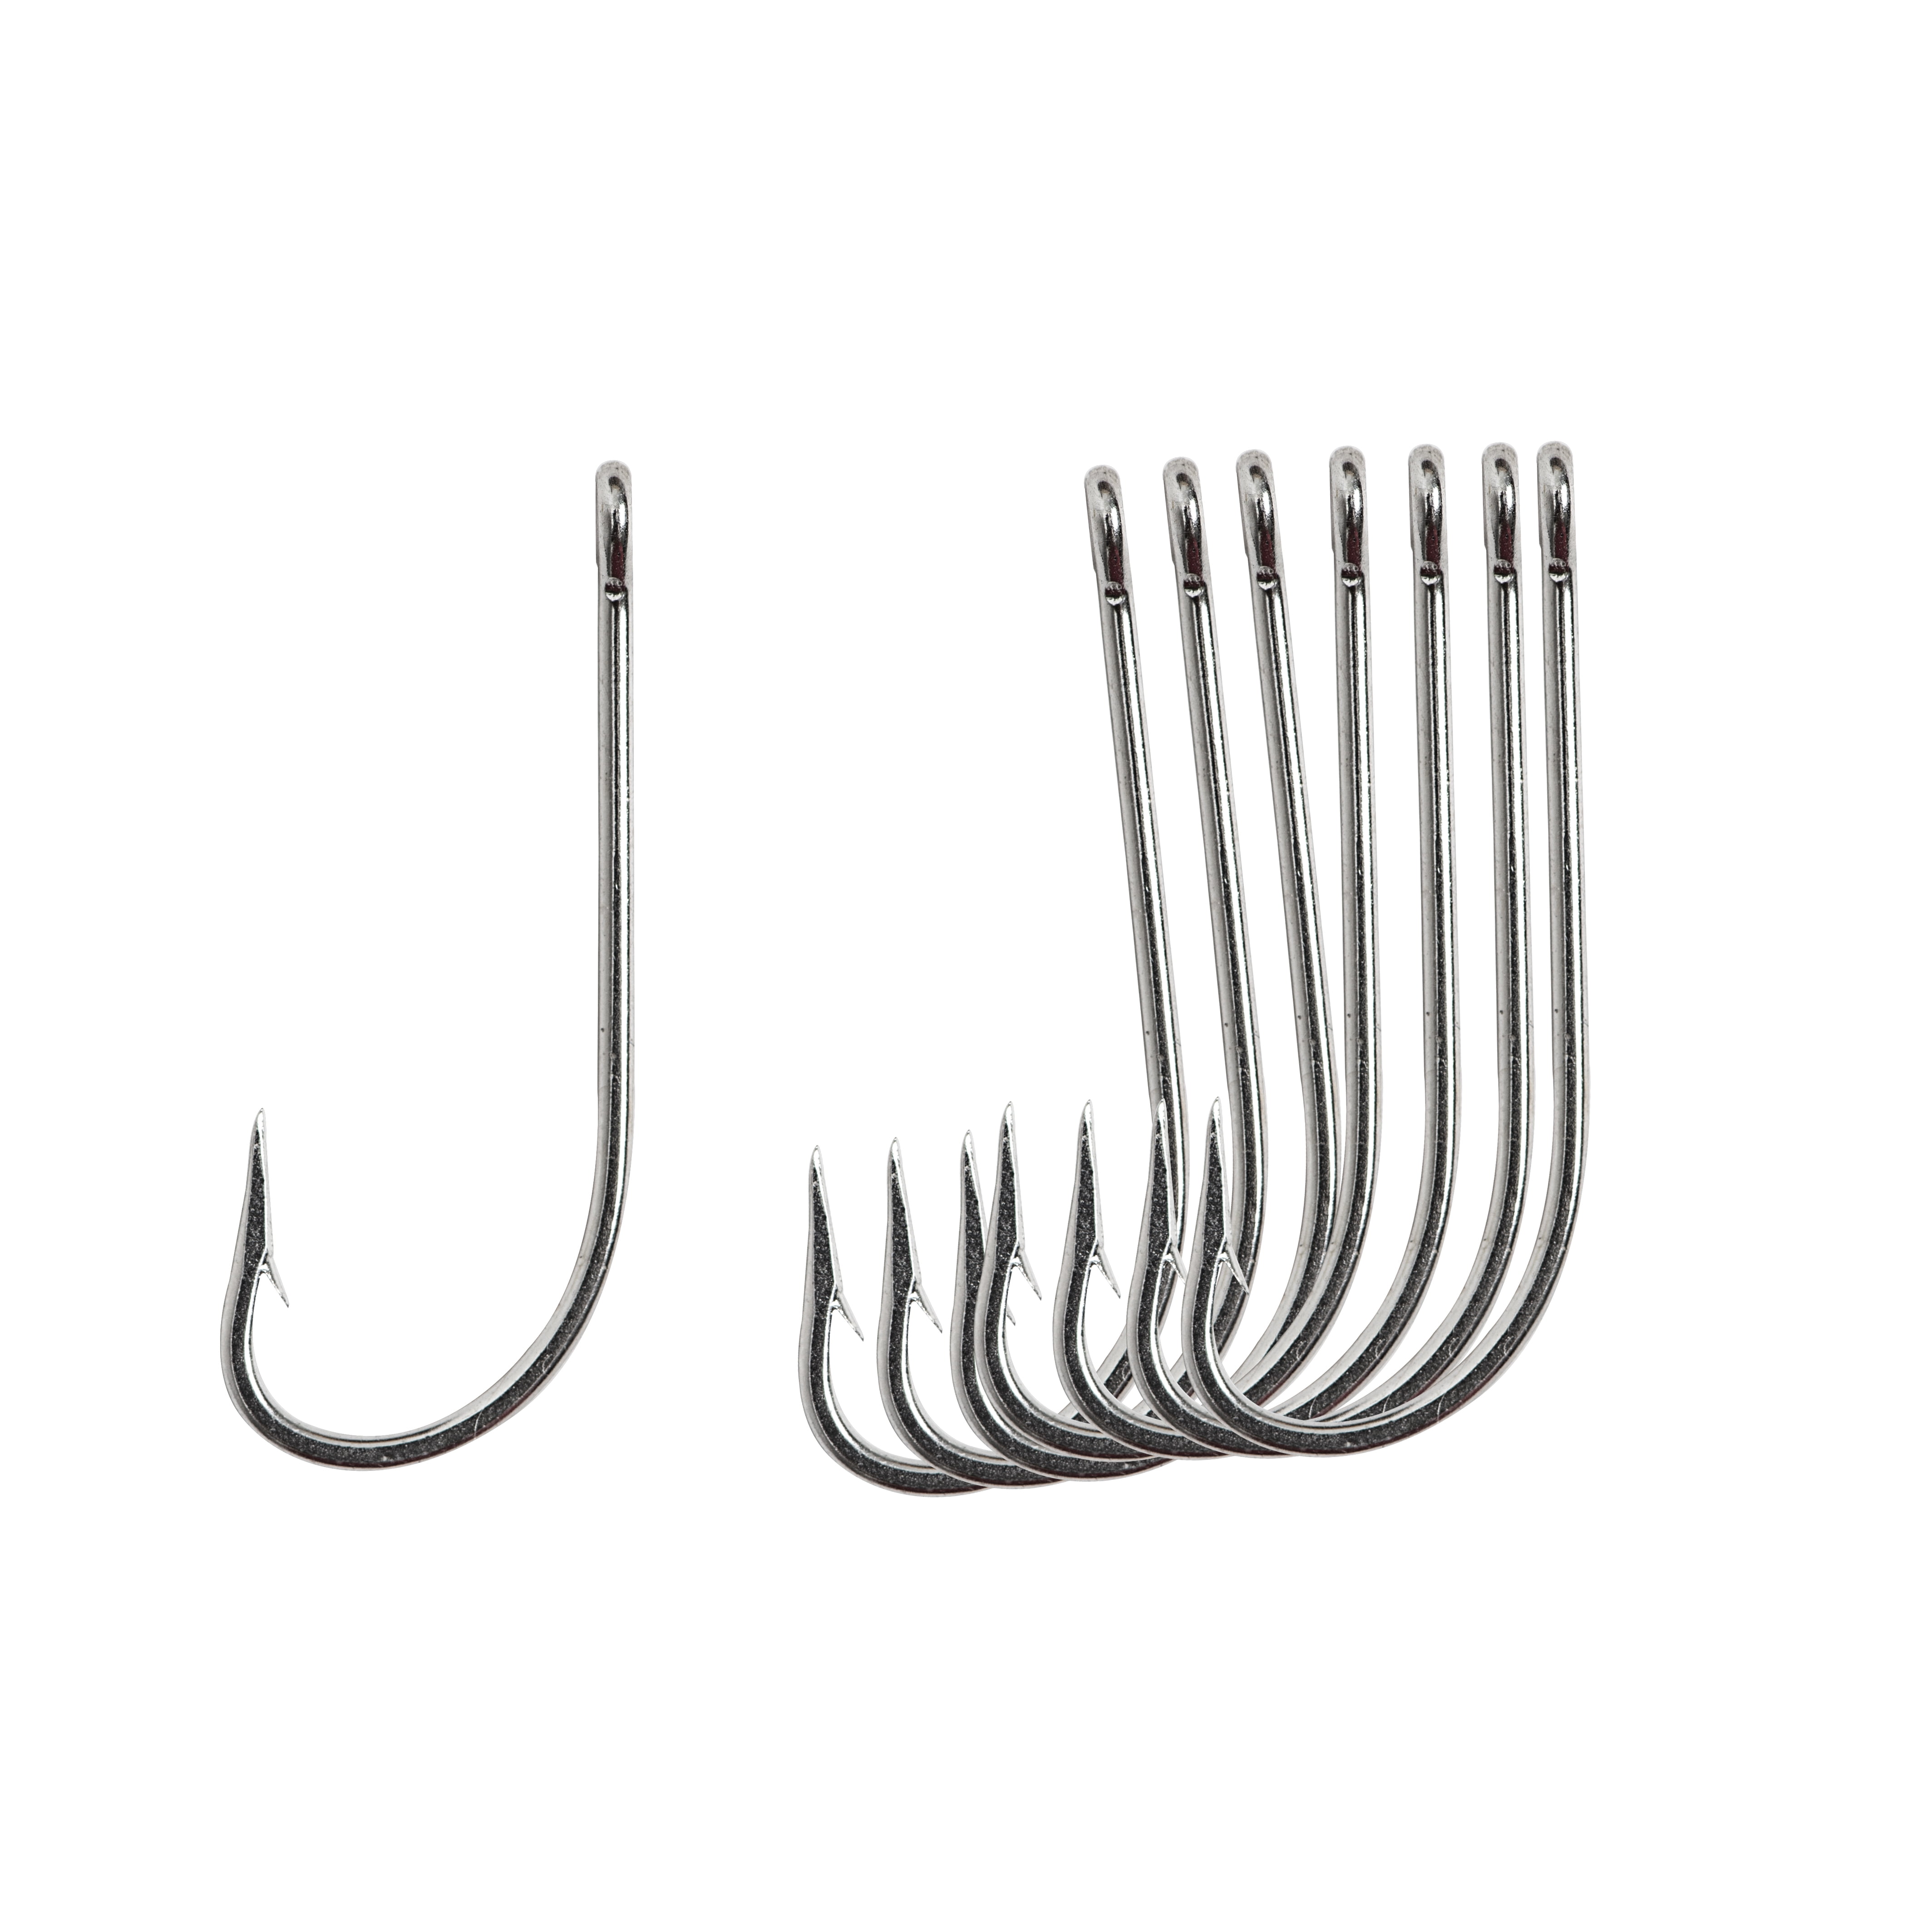 o'shaughnessy hooks A Must For Any Sea Fishing Tackle Box 